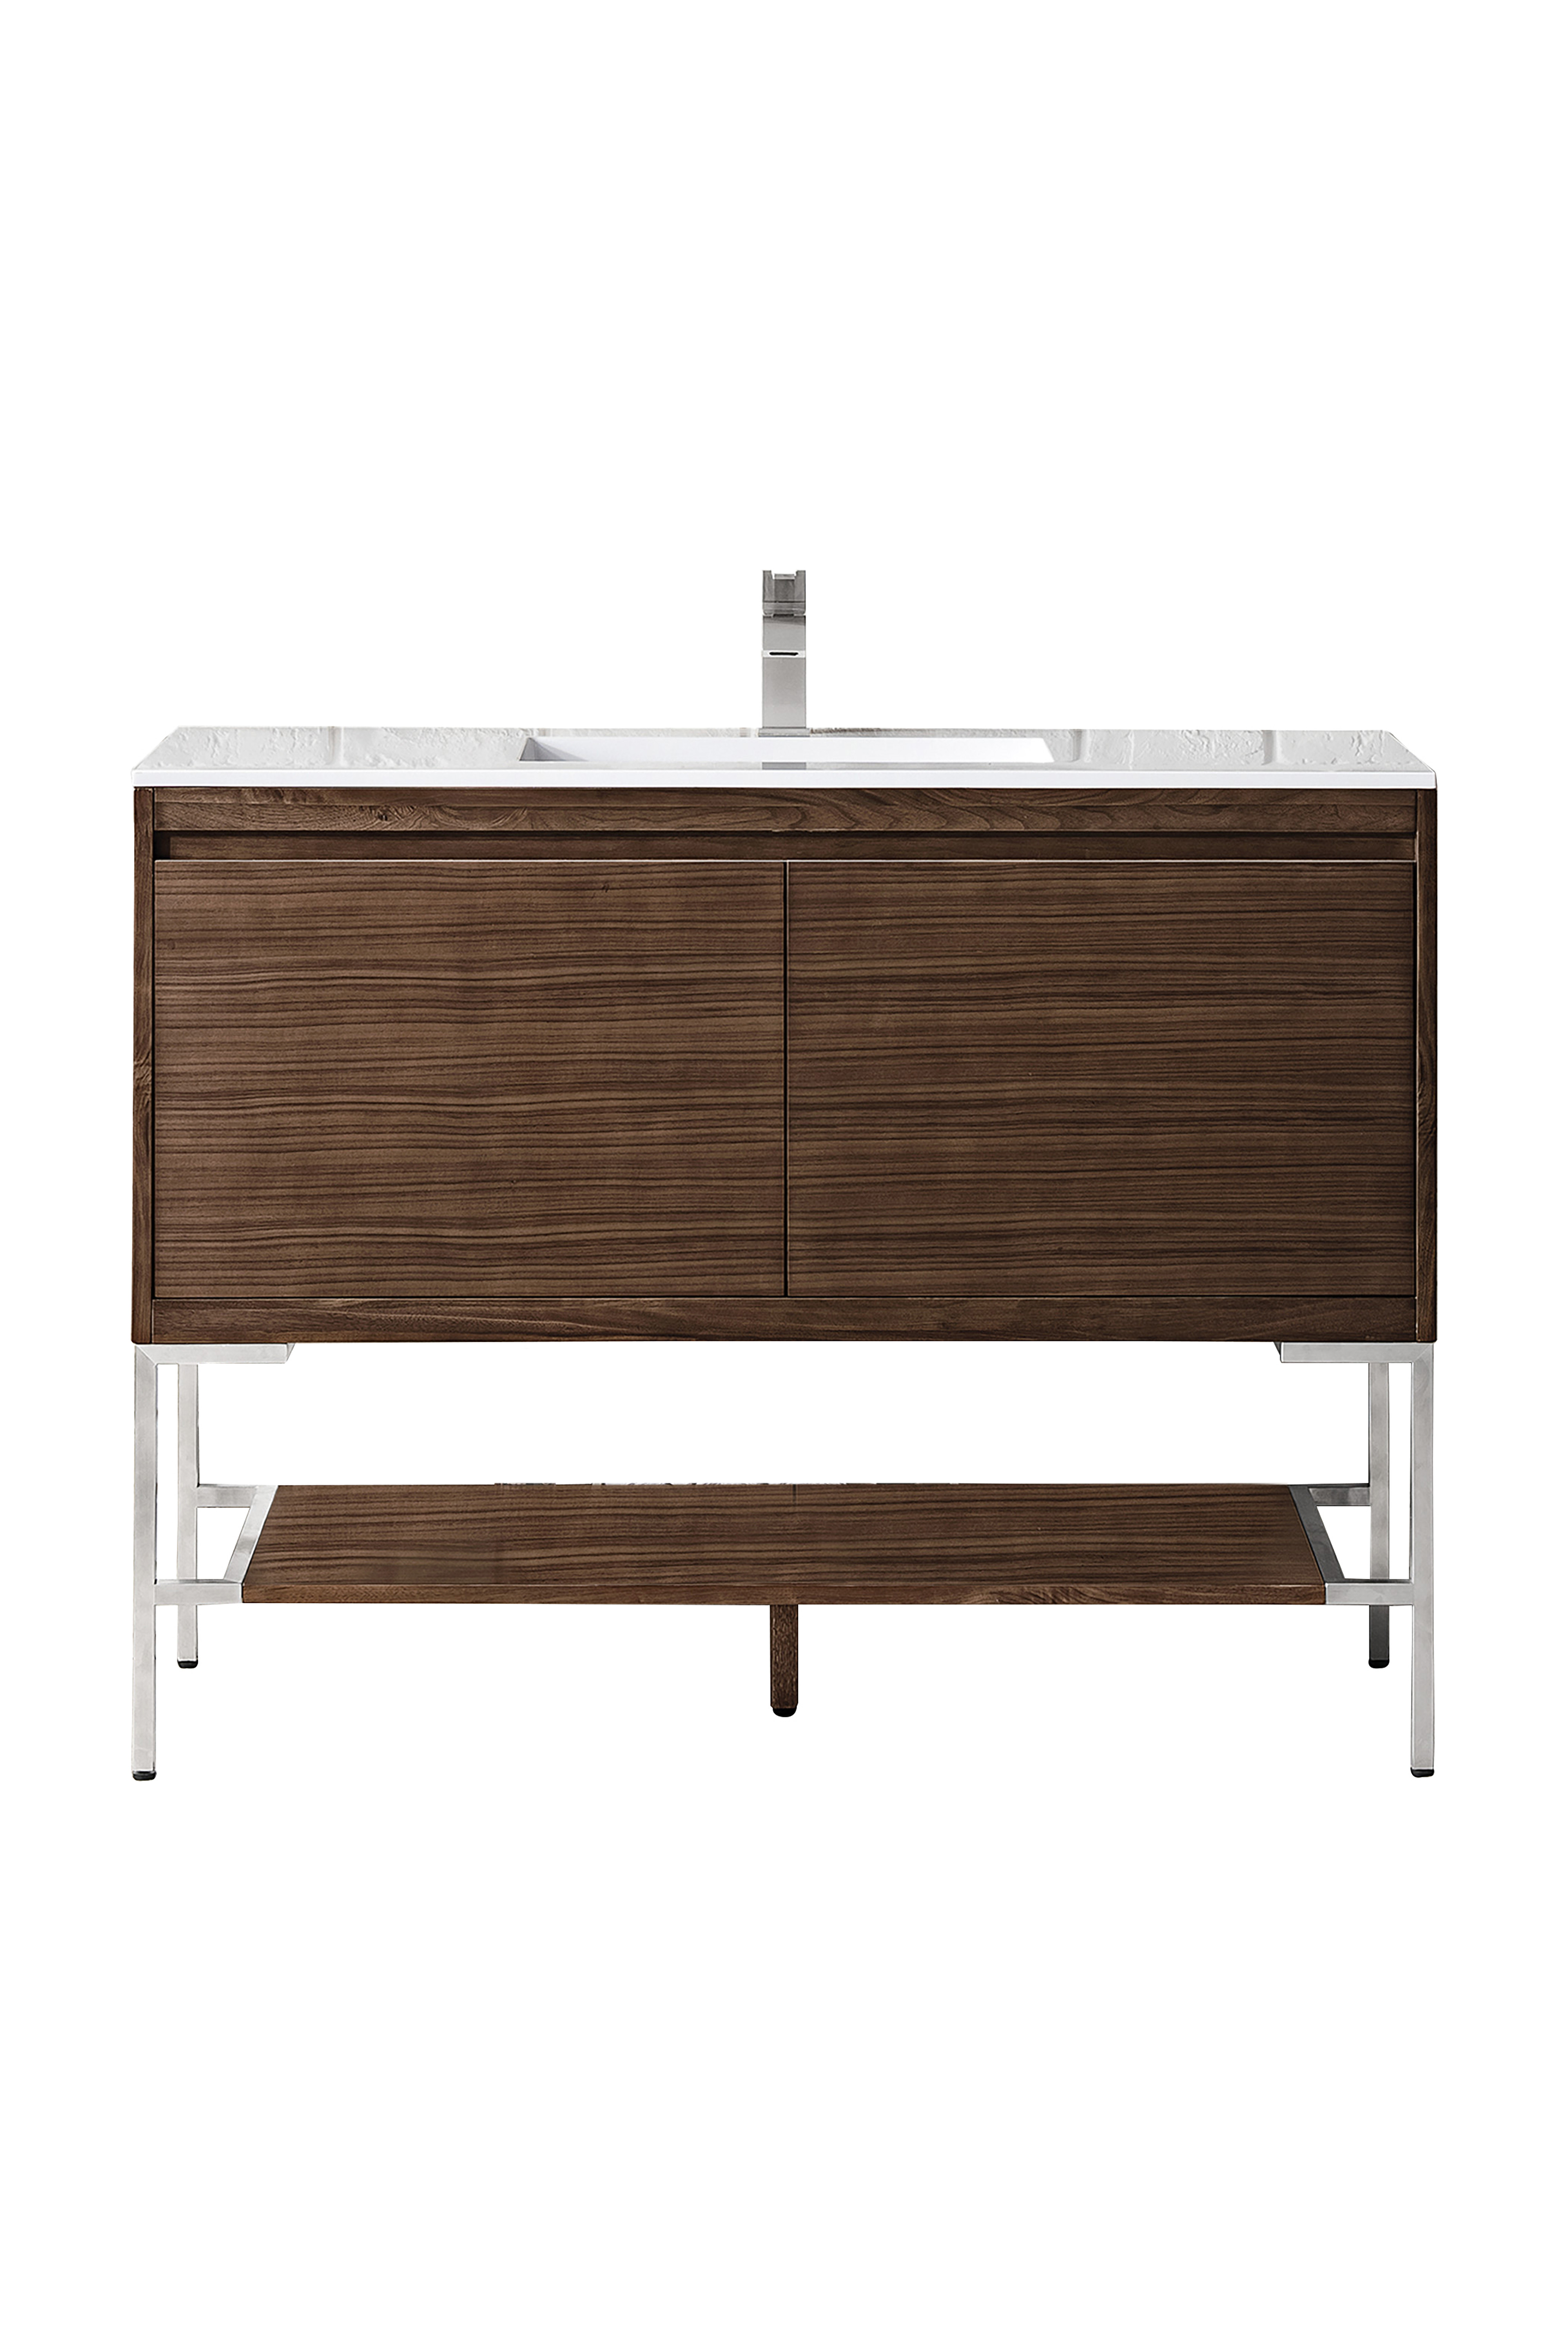 James Martin 801V47.3WLTBNKGW Milan 47.3" Single Vanity Cabinet, Mid Century Walnut, Brushed Nickel w/Glossy White Composite Top